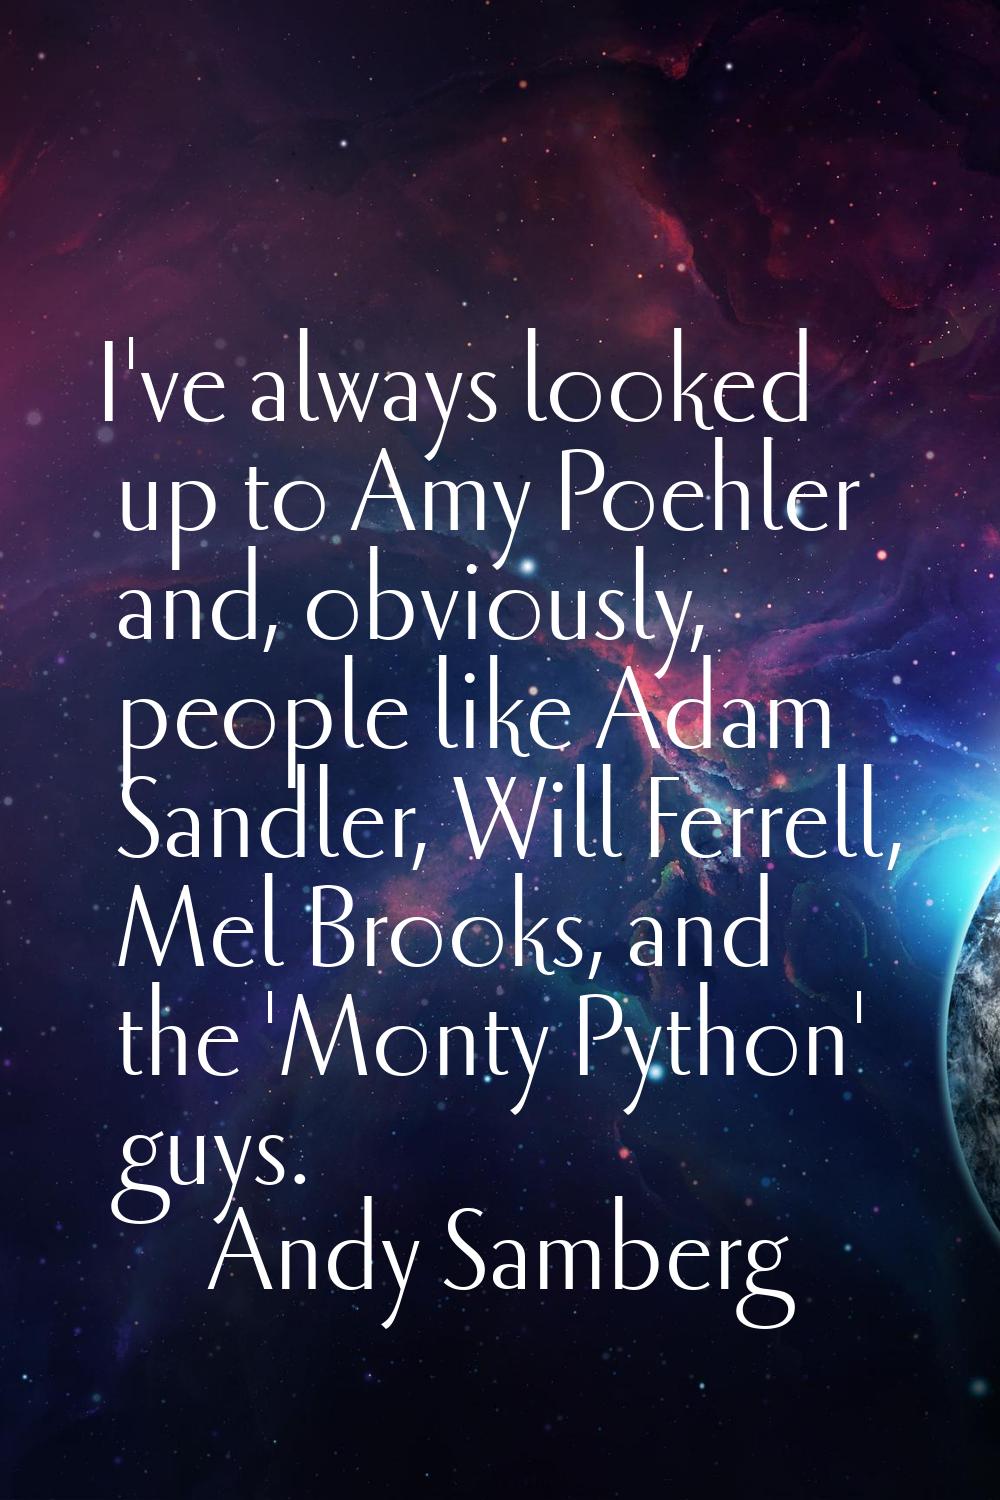 I've always looked up to Amy Poehler and, obviously, people like Adam Sandler, Will Ferrell, Mel Br